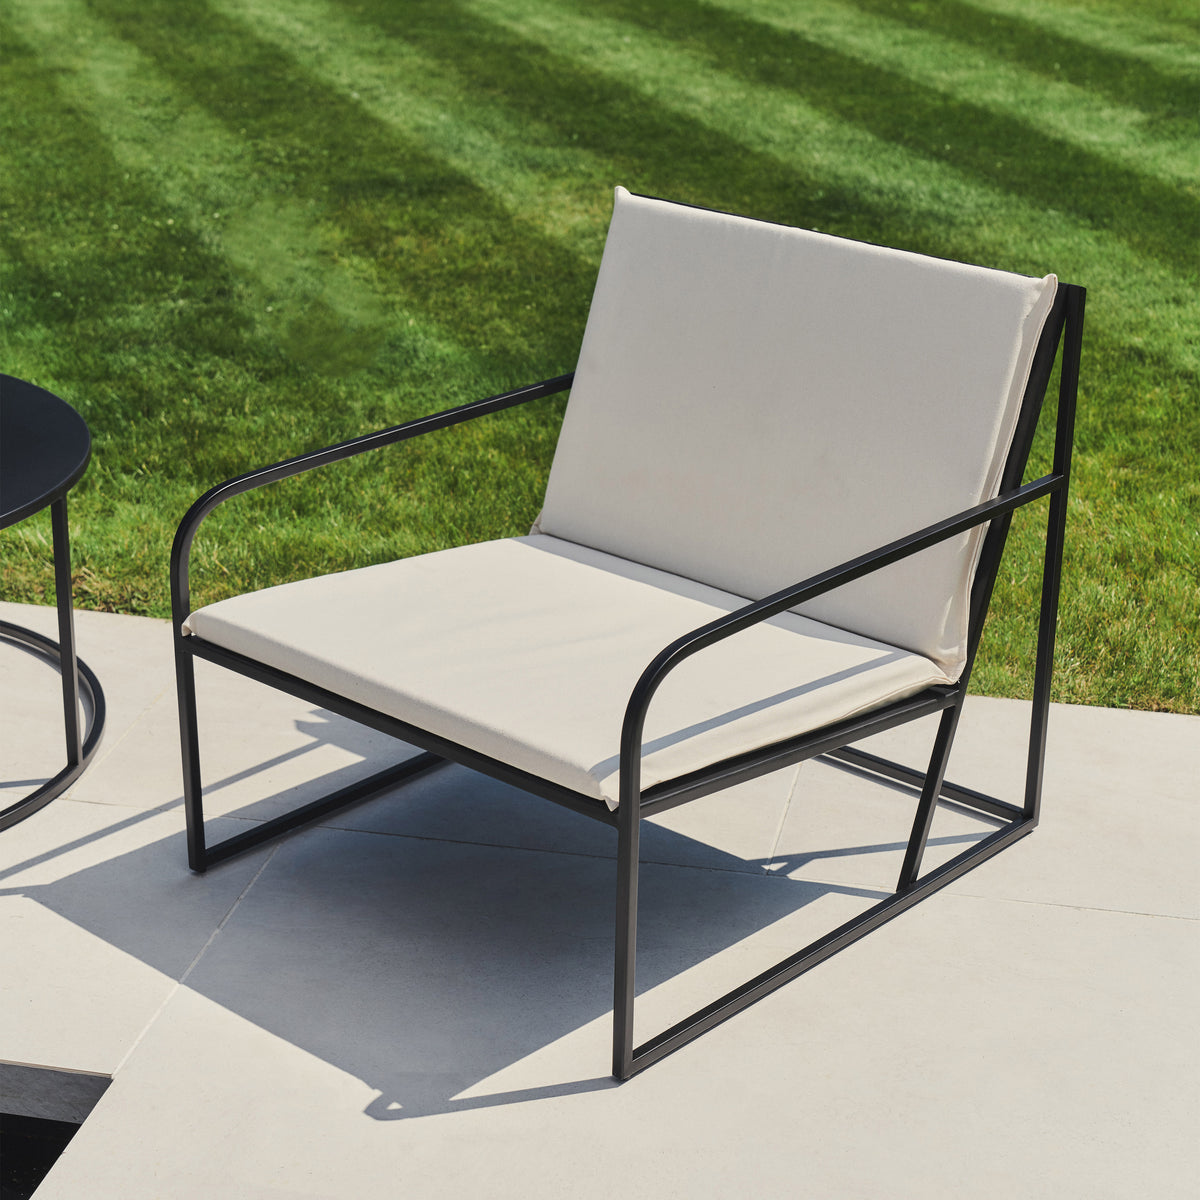 Sand Modern Rounded Garden Chair on concrete tiles